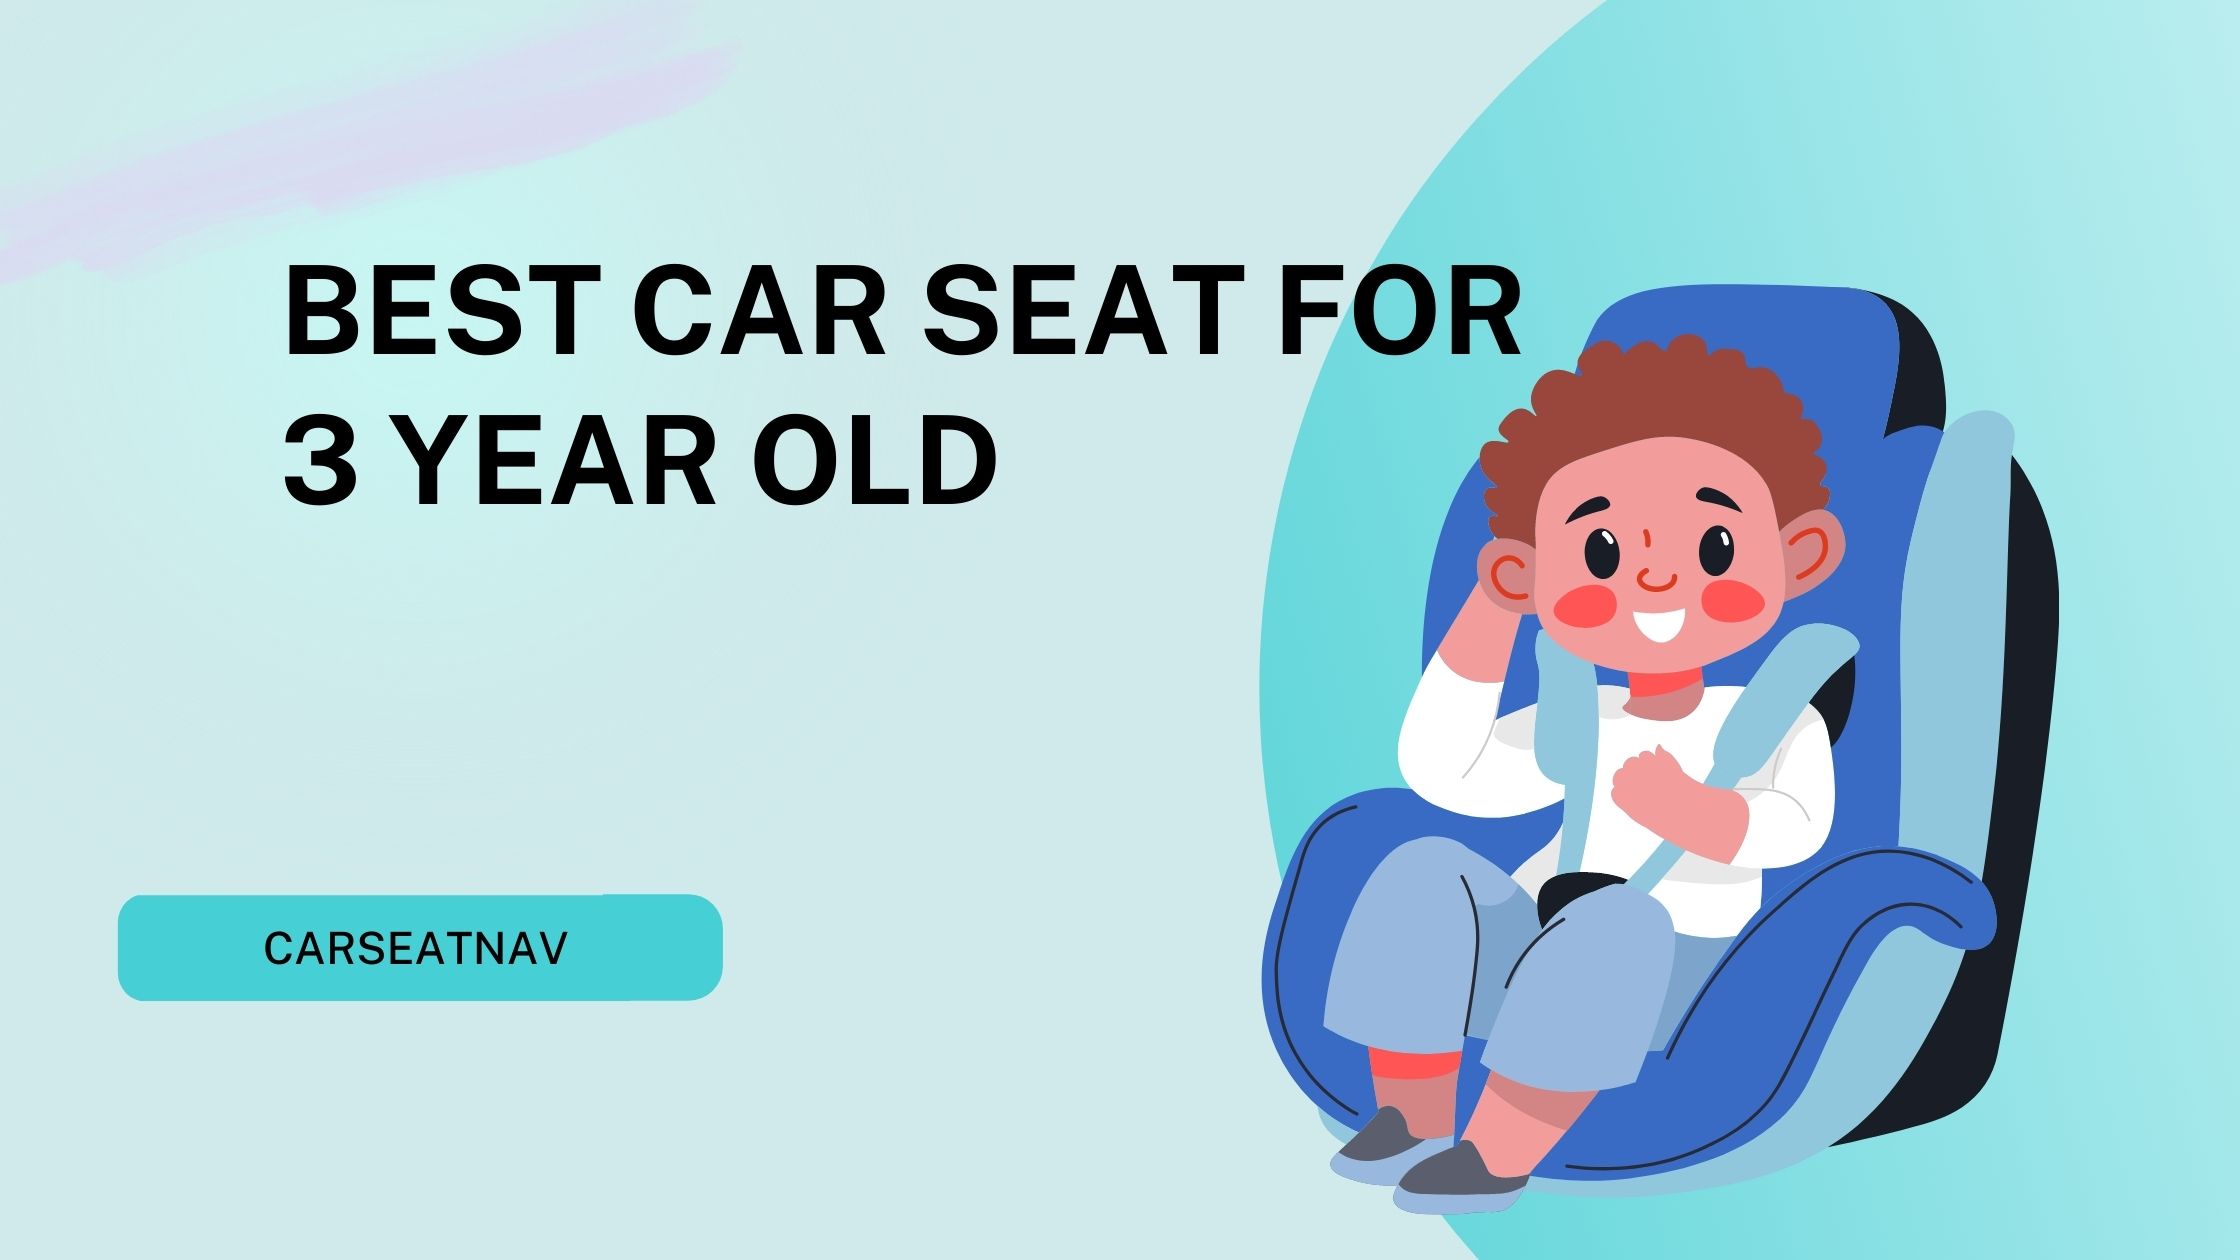 The 7 Best Car Seat For 3-year-olds in 2022